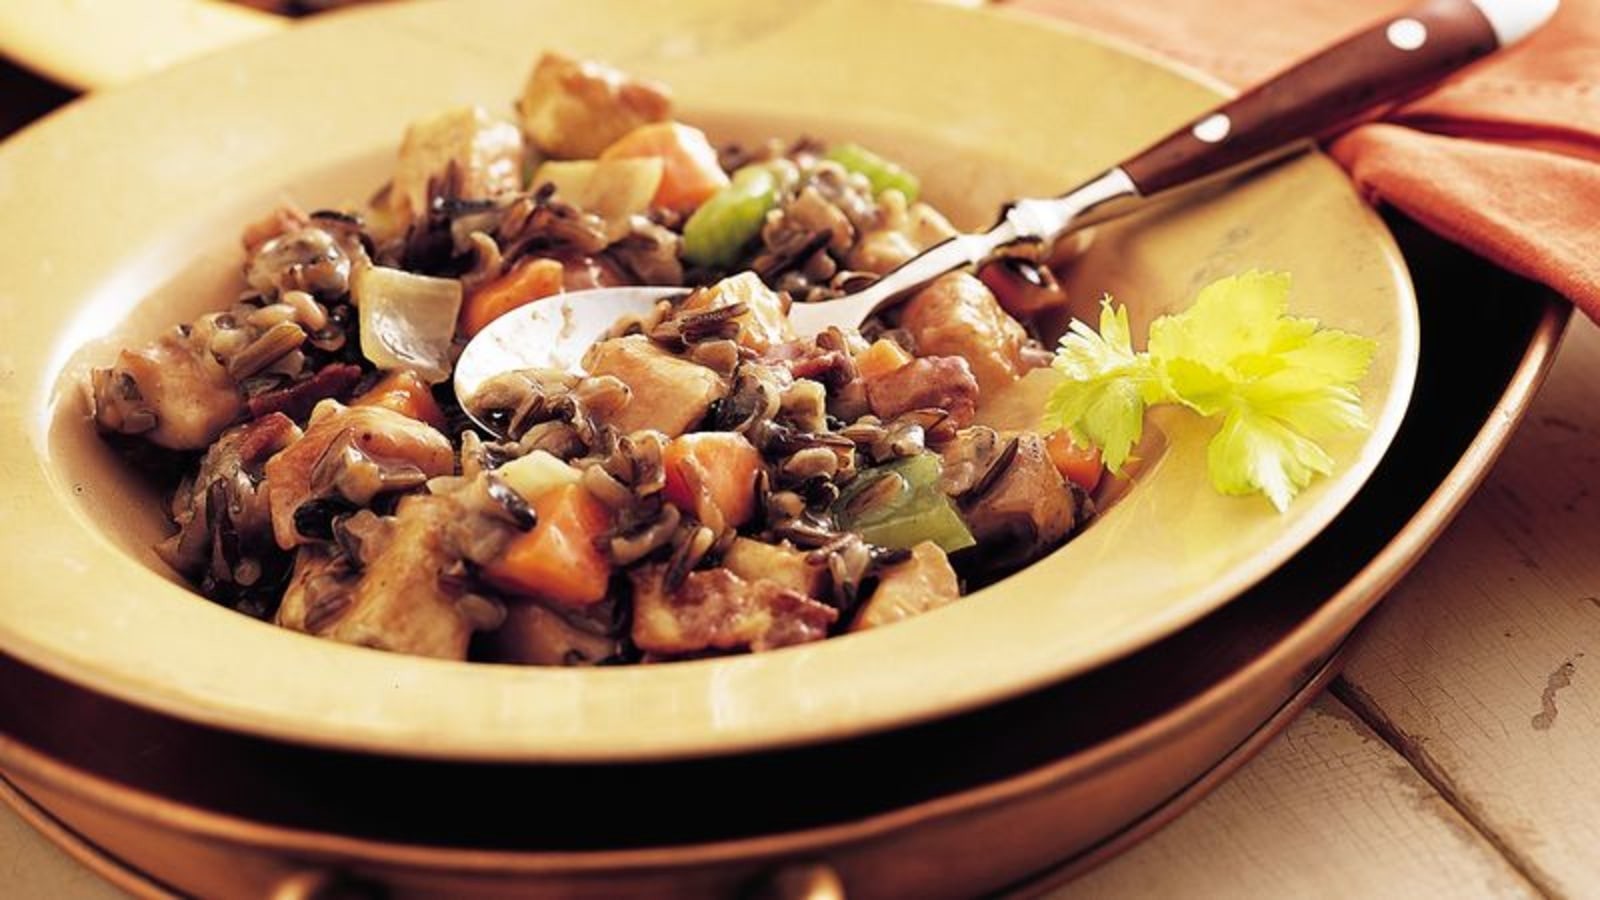 Image of Slow-Cooker Herbed Turkey and Wild Rice Casserole